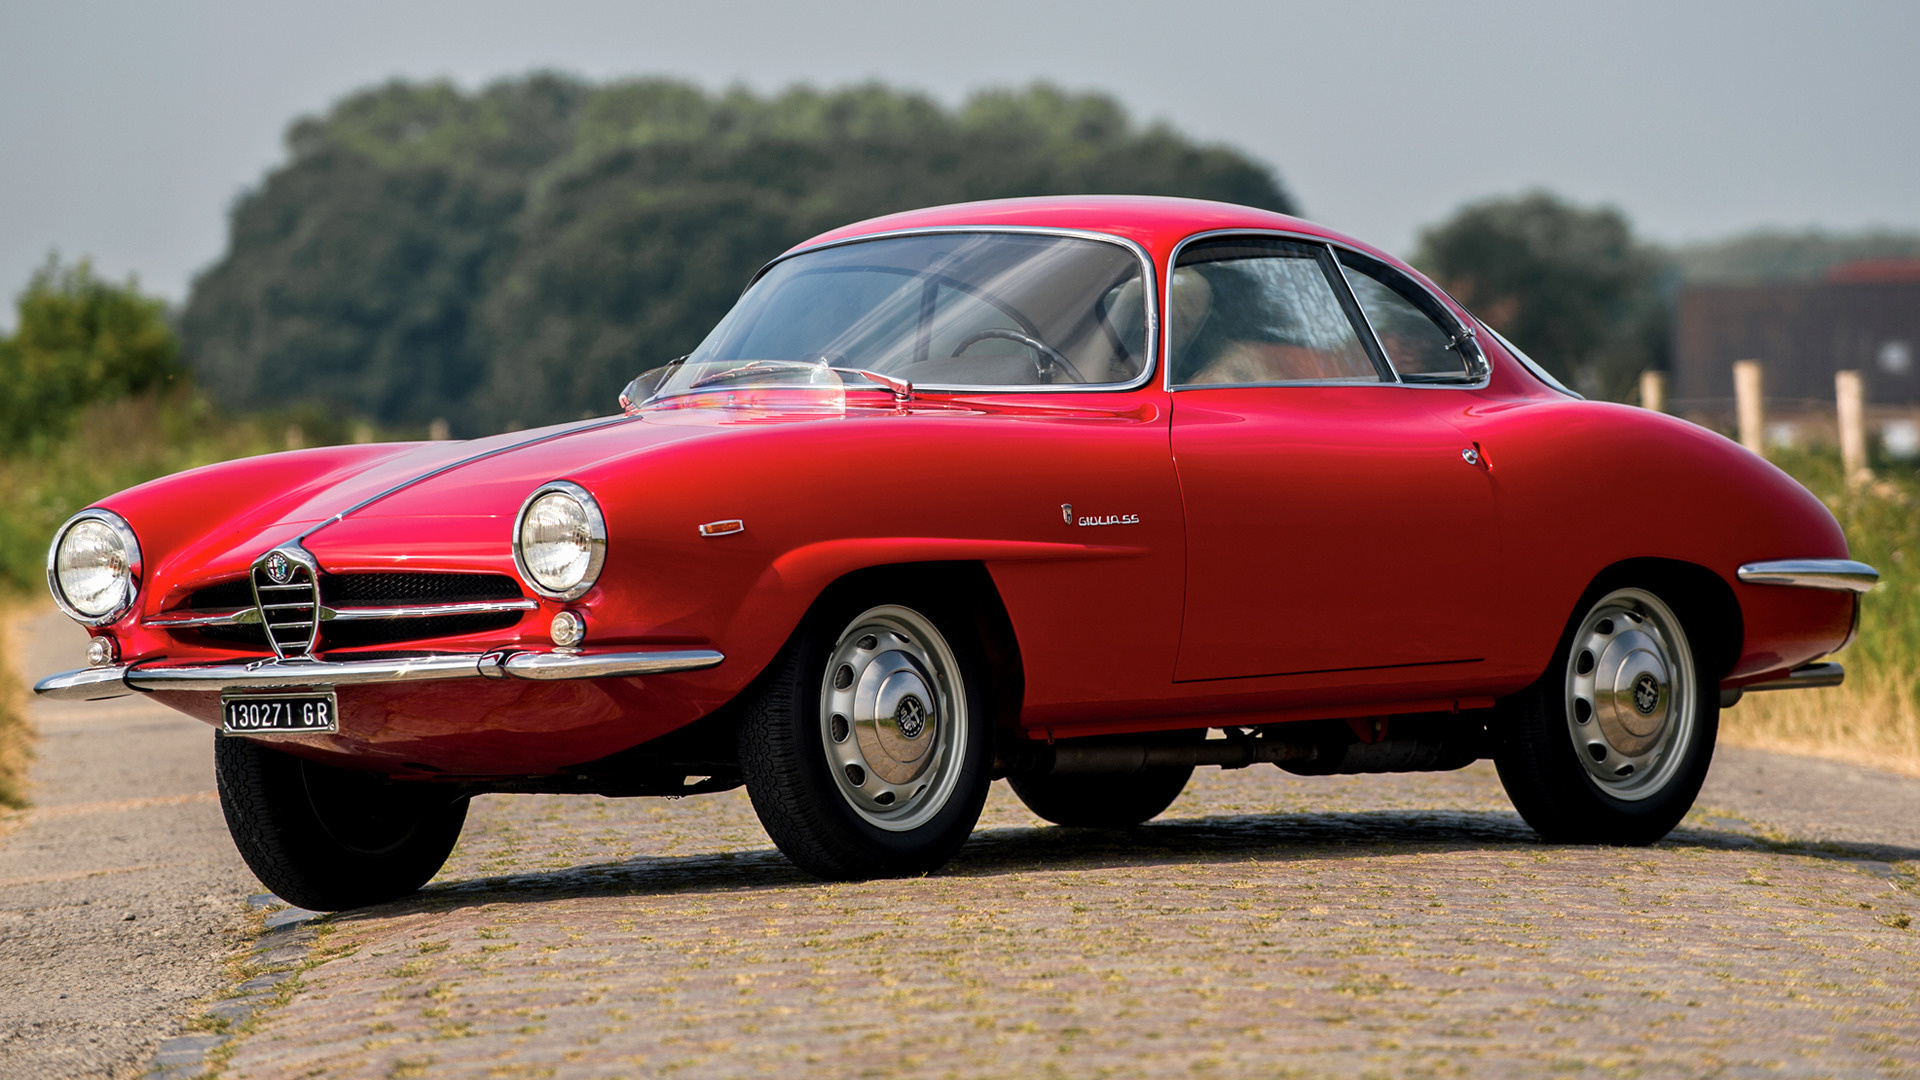 1963 Alfa Romeo Giulia 1600 Sprint Speciale - Wallpapers and HD Images